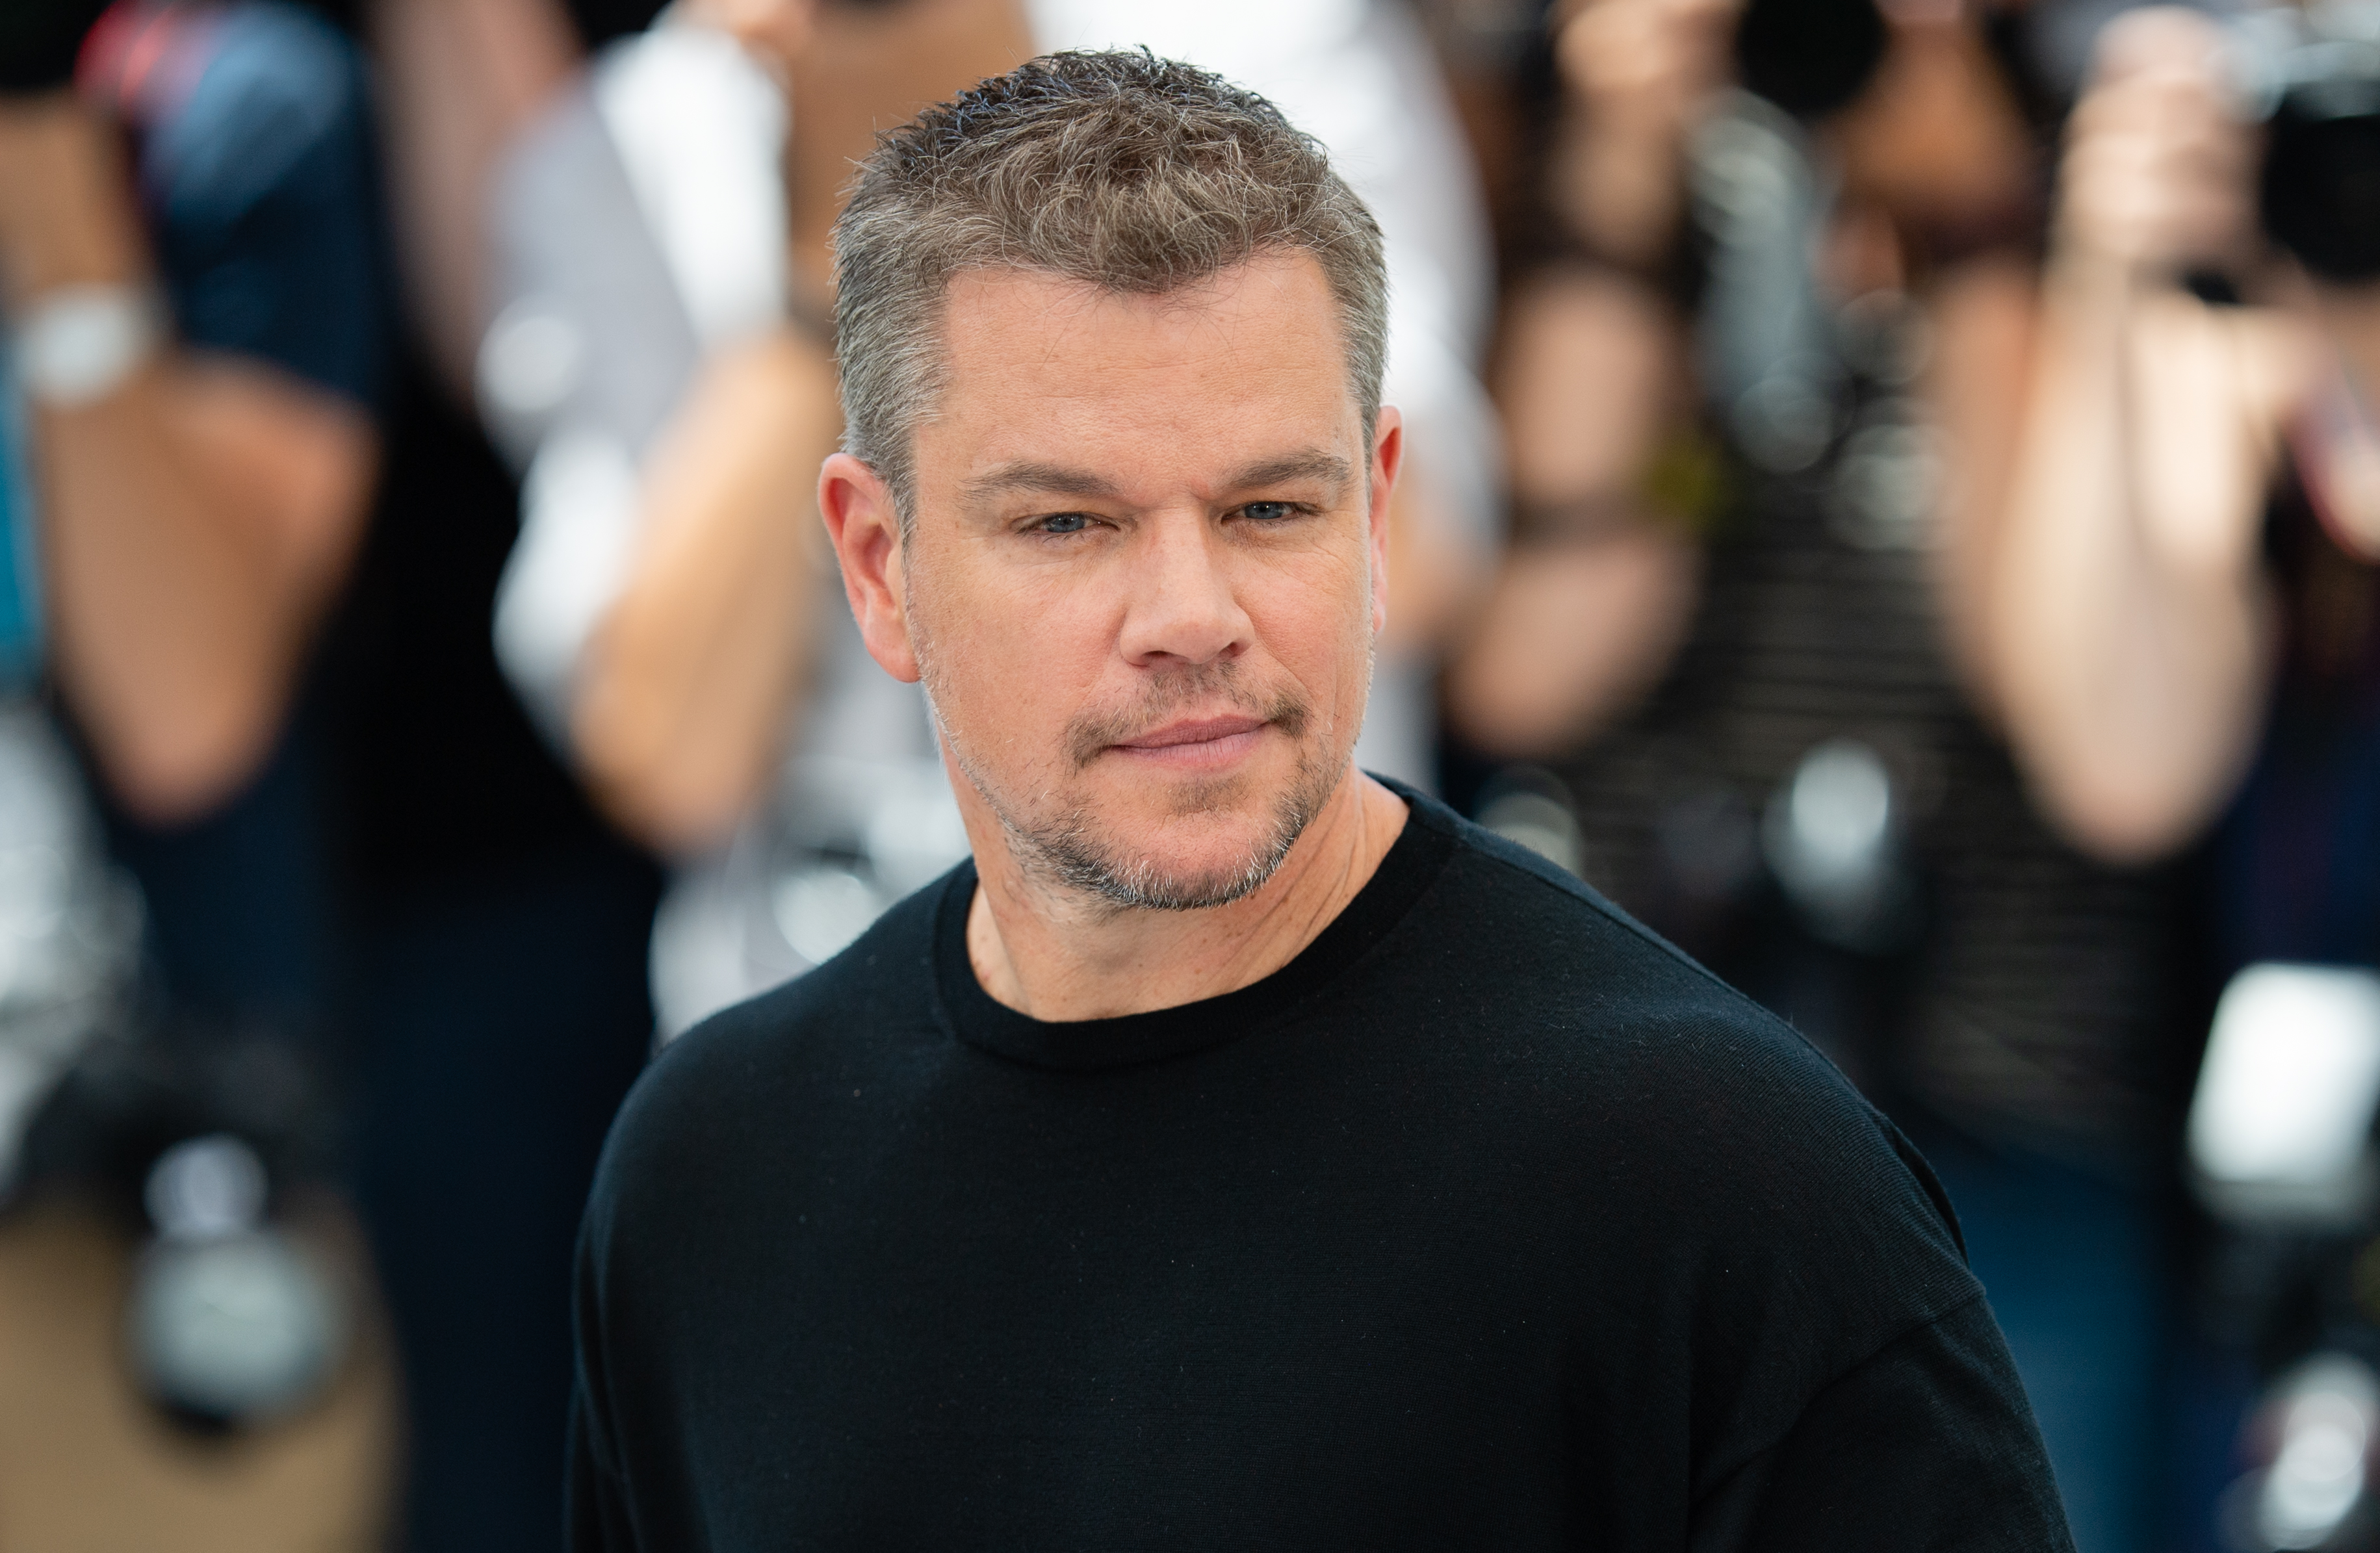 Matt Damon likes to keep a low profile and focus on his family and career (Photo by Samir Hussein/WireImage)